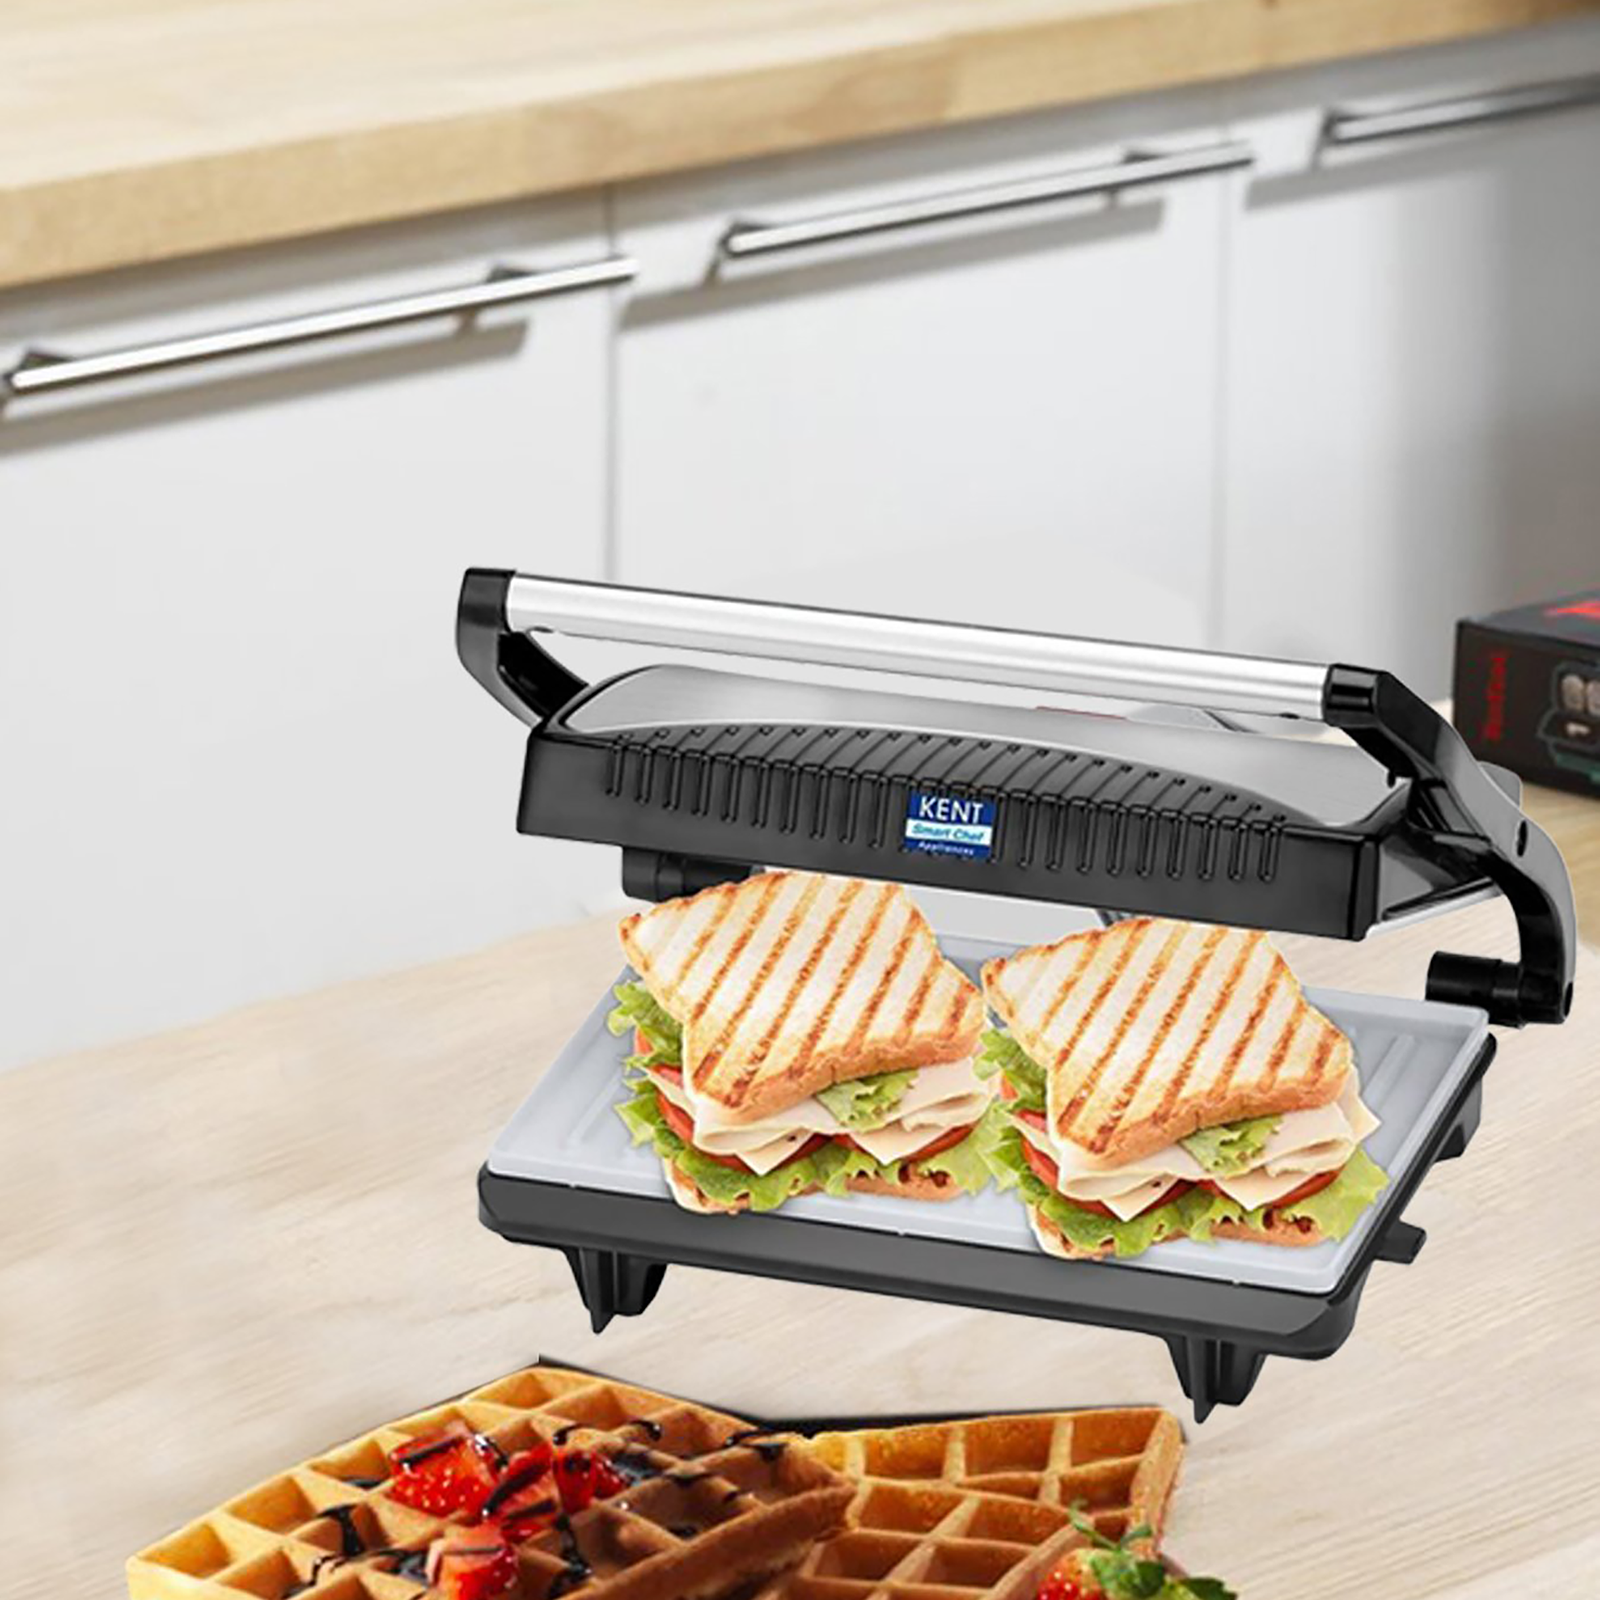 KENT Grill Sandwich Toaster, Power: 700W, Model Name/Number: 16025